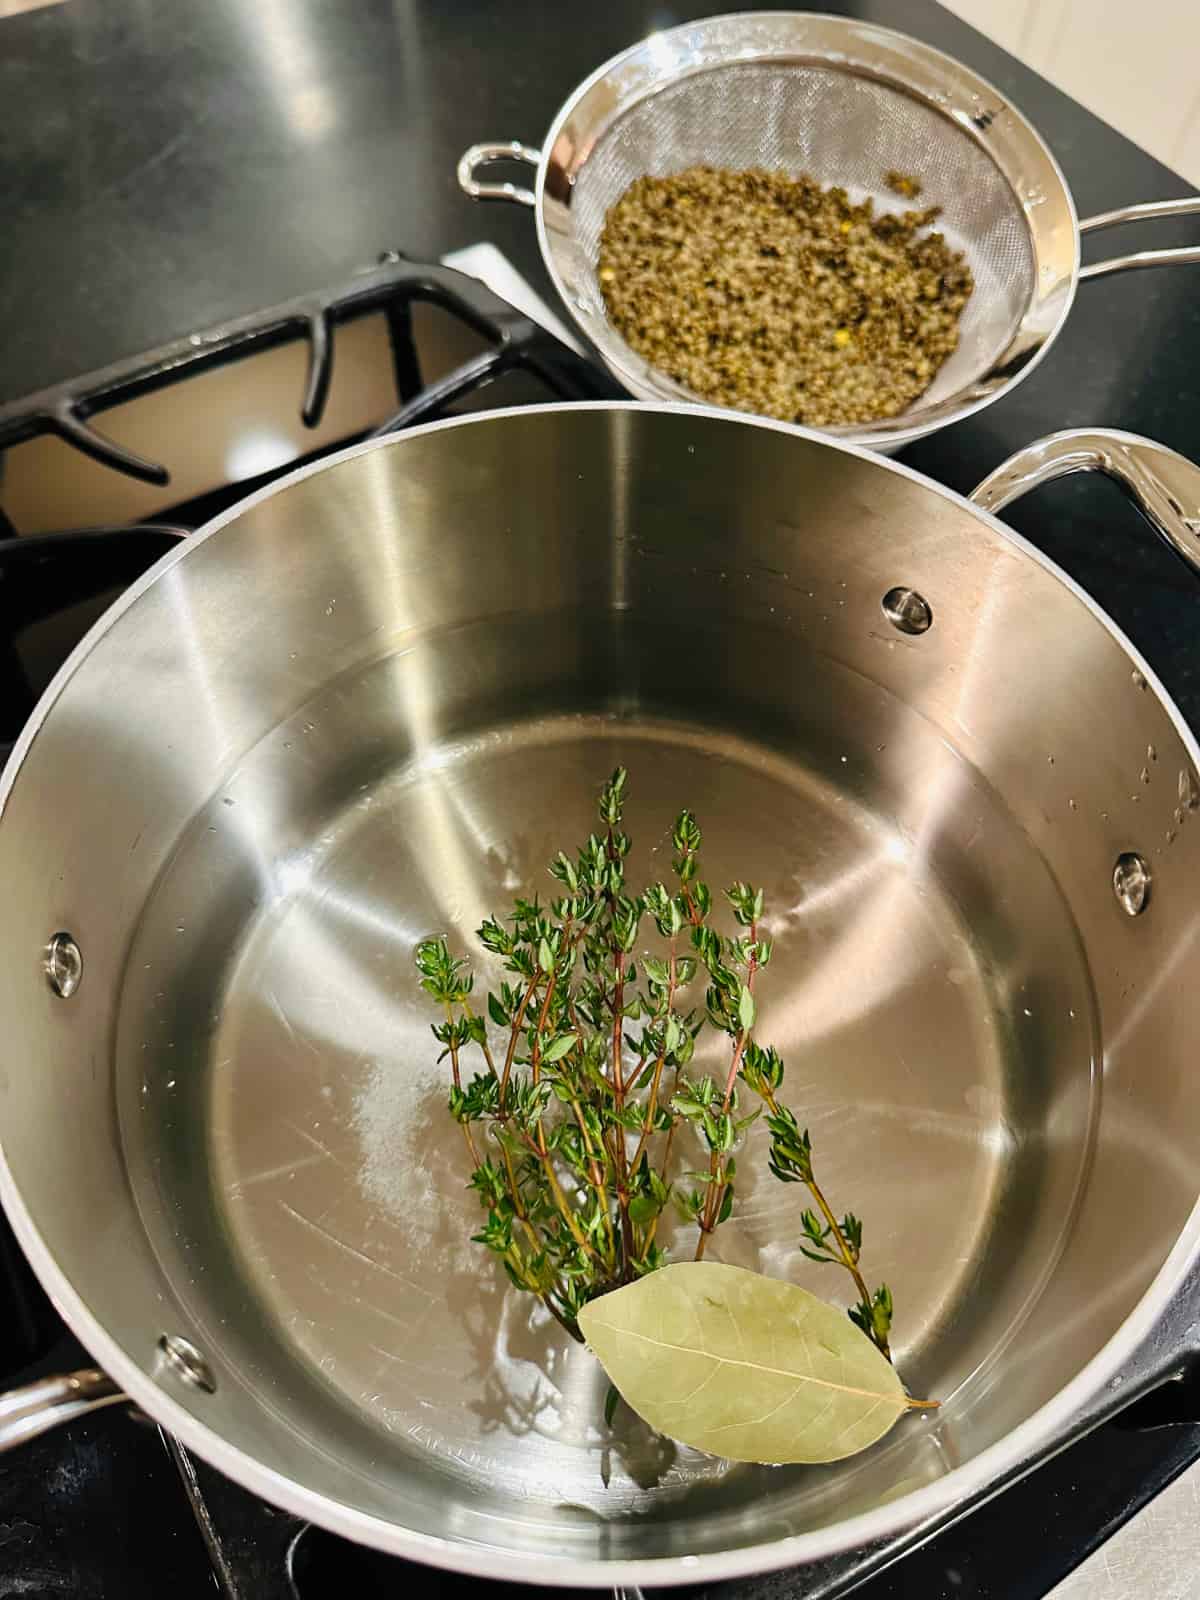 Thyme sprigs and bay leaf floating in water in a steel pot in front of lentils in a colander.